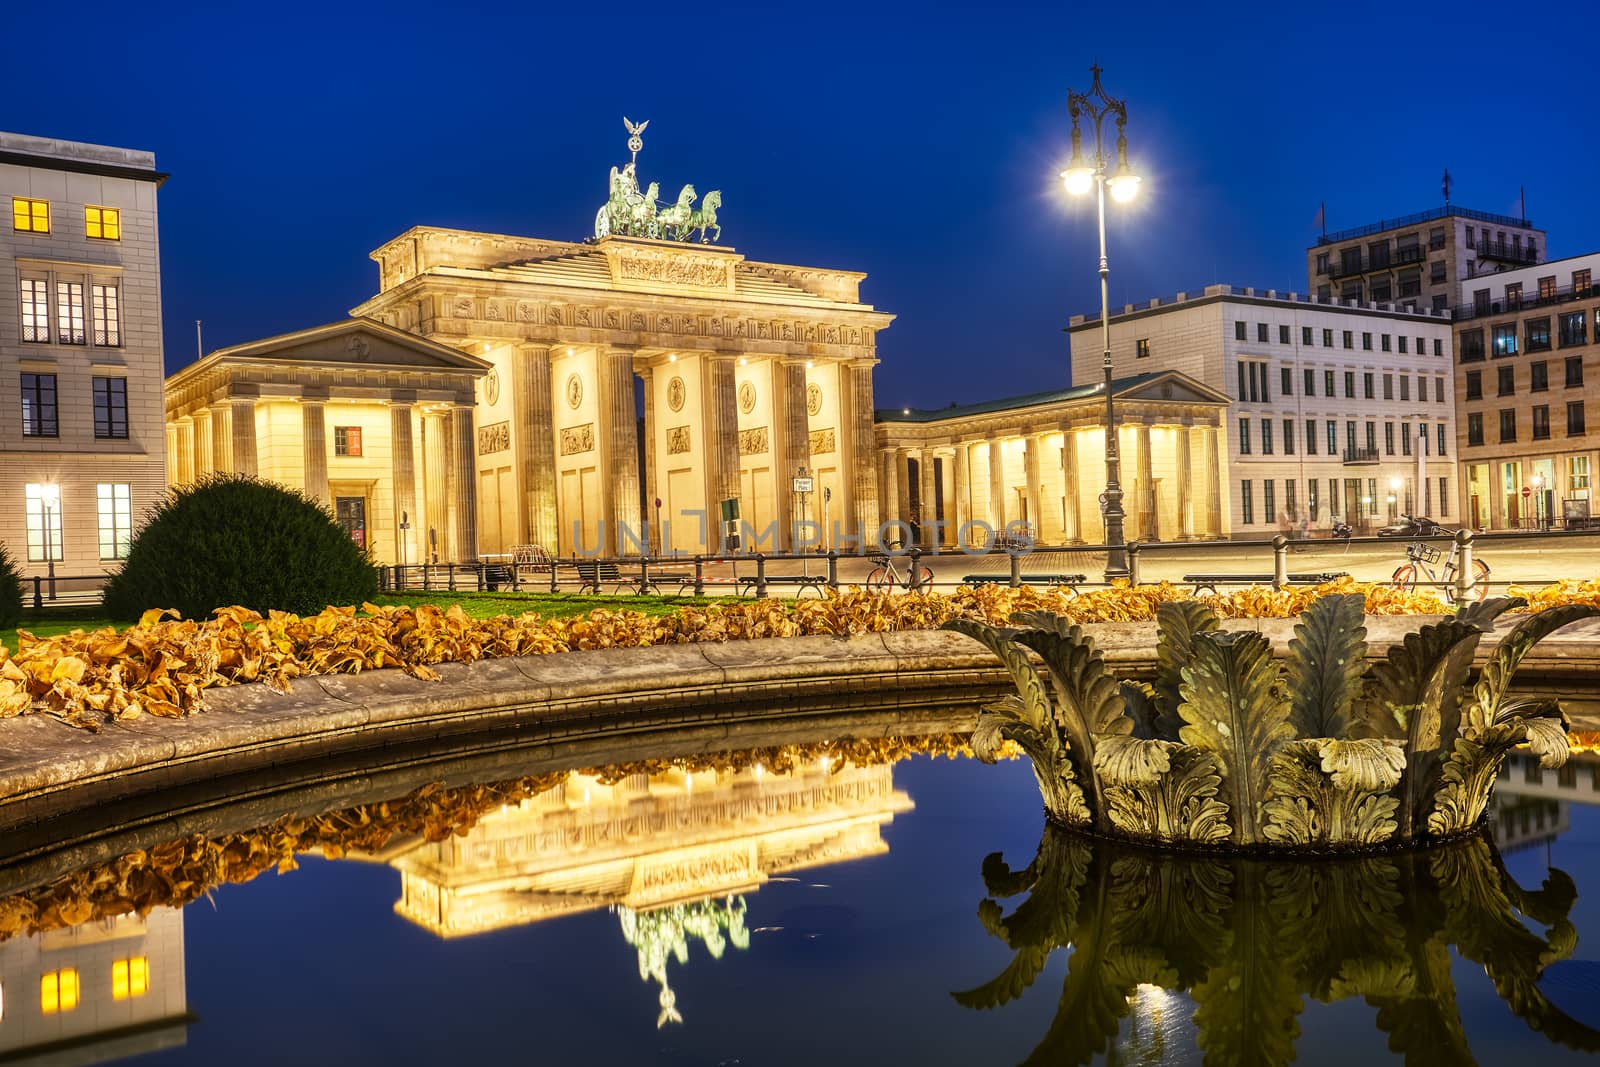 The famous Brandenburger Tor in Berlin at night, reflected in a fountain